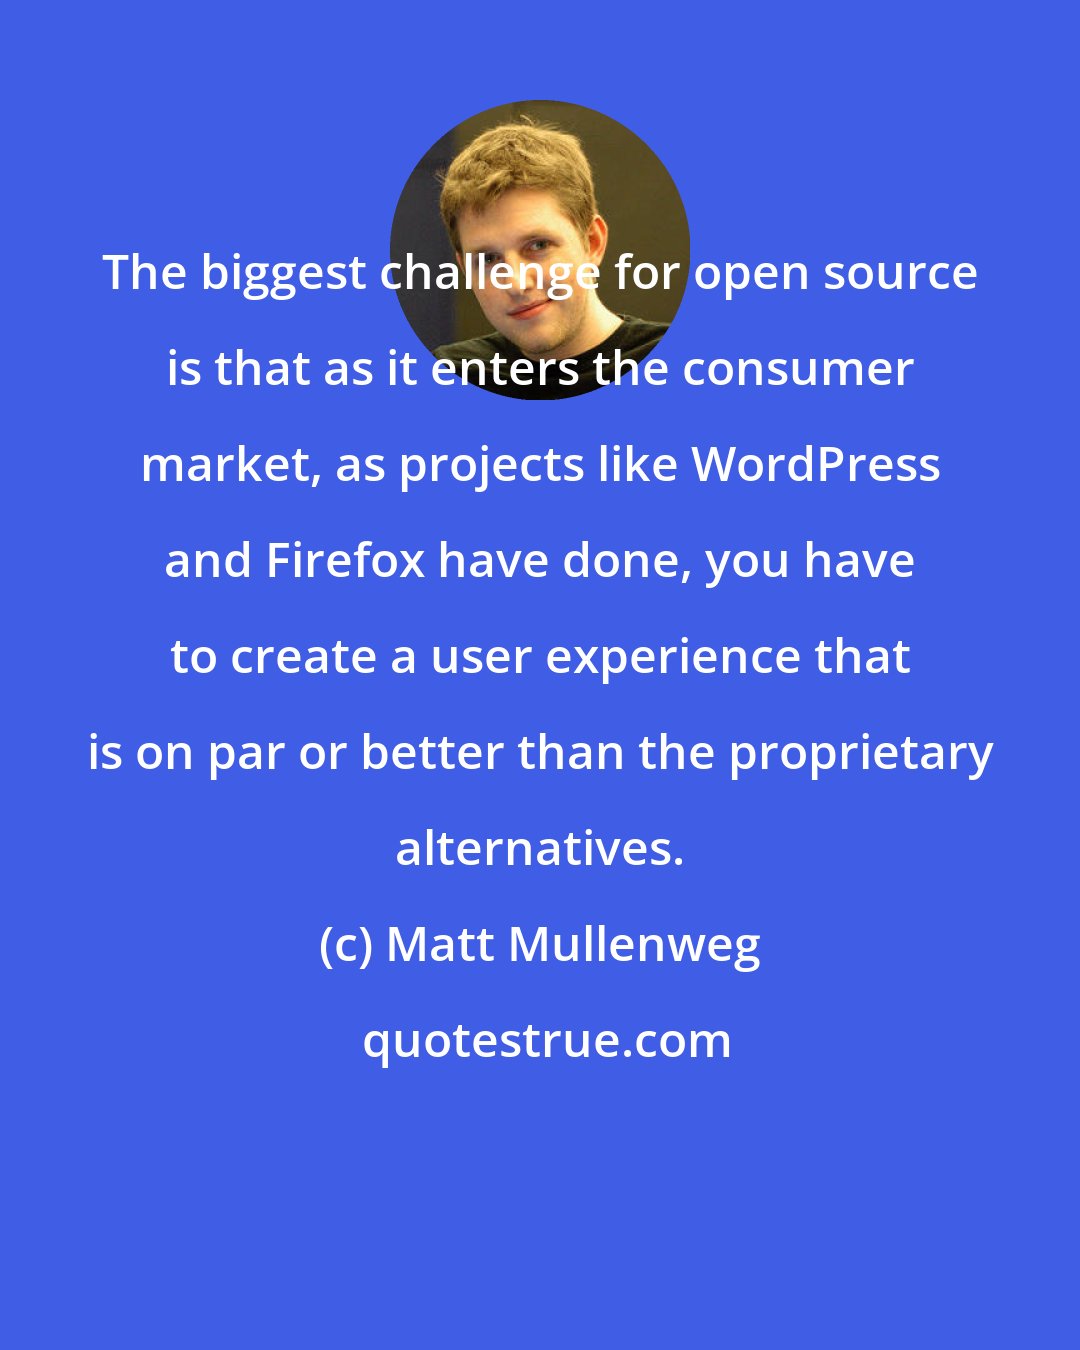 Matt Mullenweg: The biggest challenge for open source is that as it enters the consumer market, as projects like WordPress and Firefox have done, you have to create a user experience that is on par or better than the proprietary alternatives.